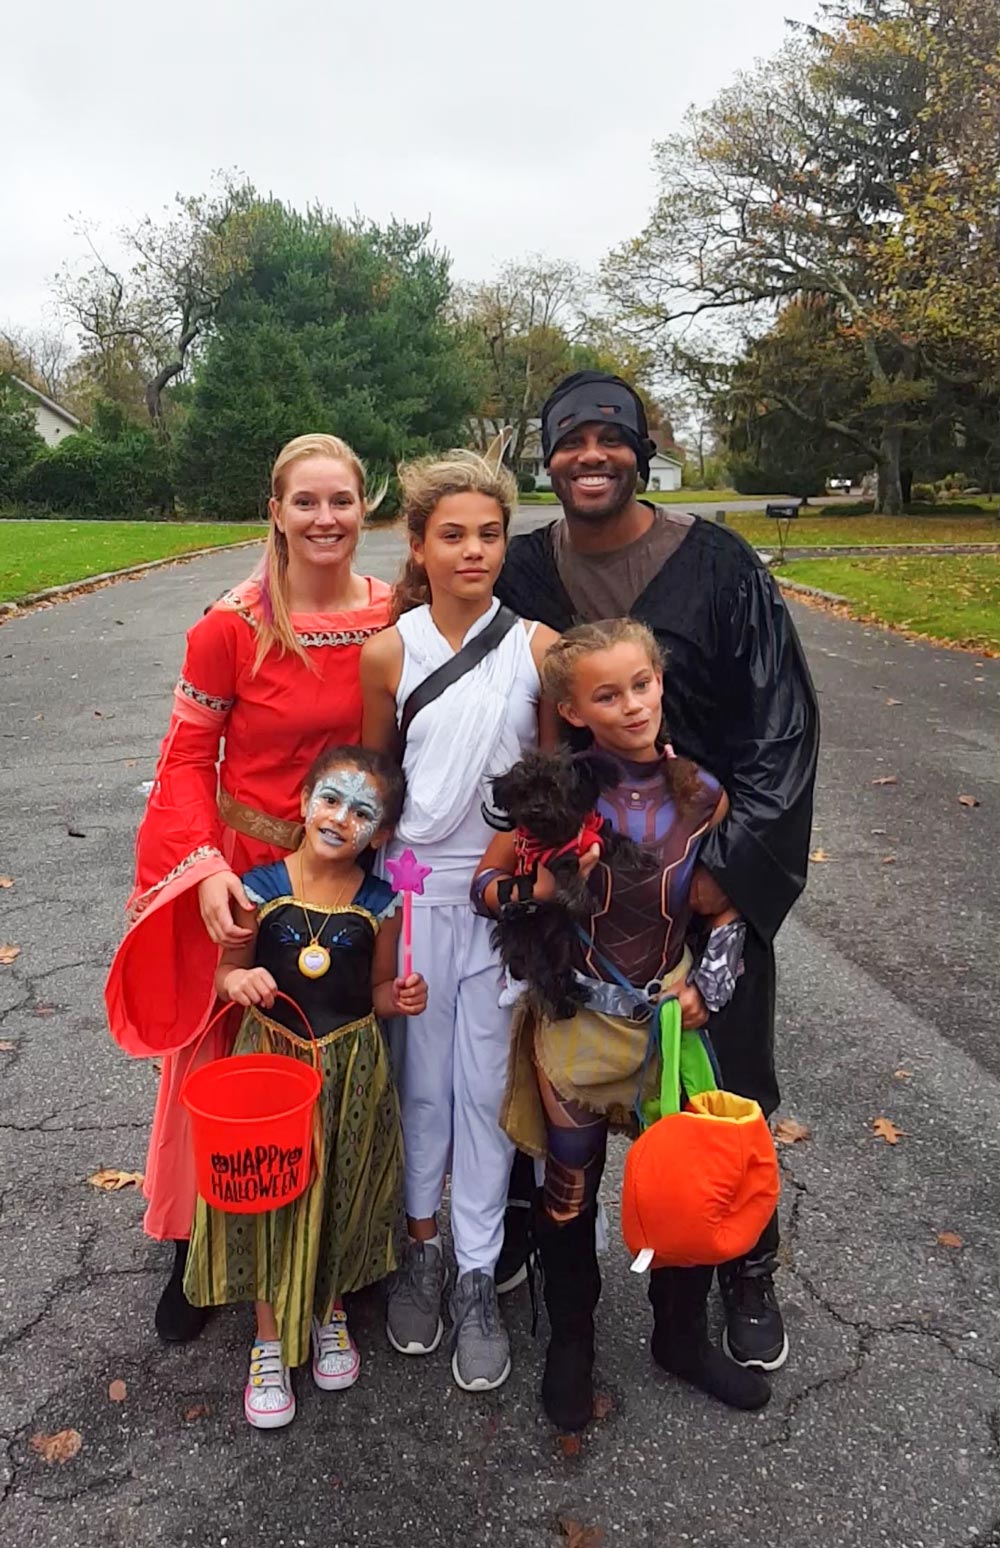 Marshall and Courtney Leonard with their three daughters dressed up in costumes for halloween